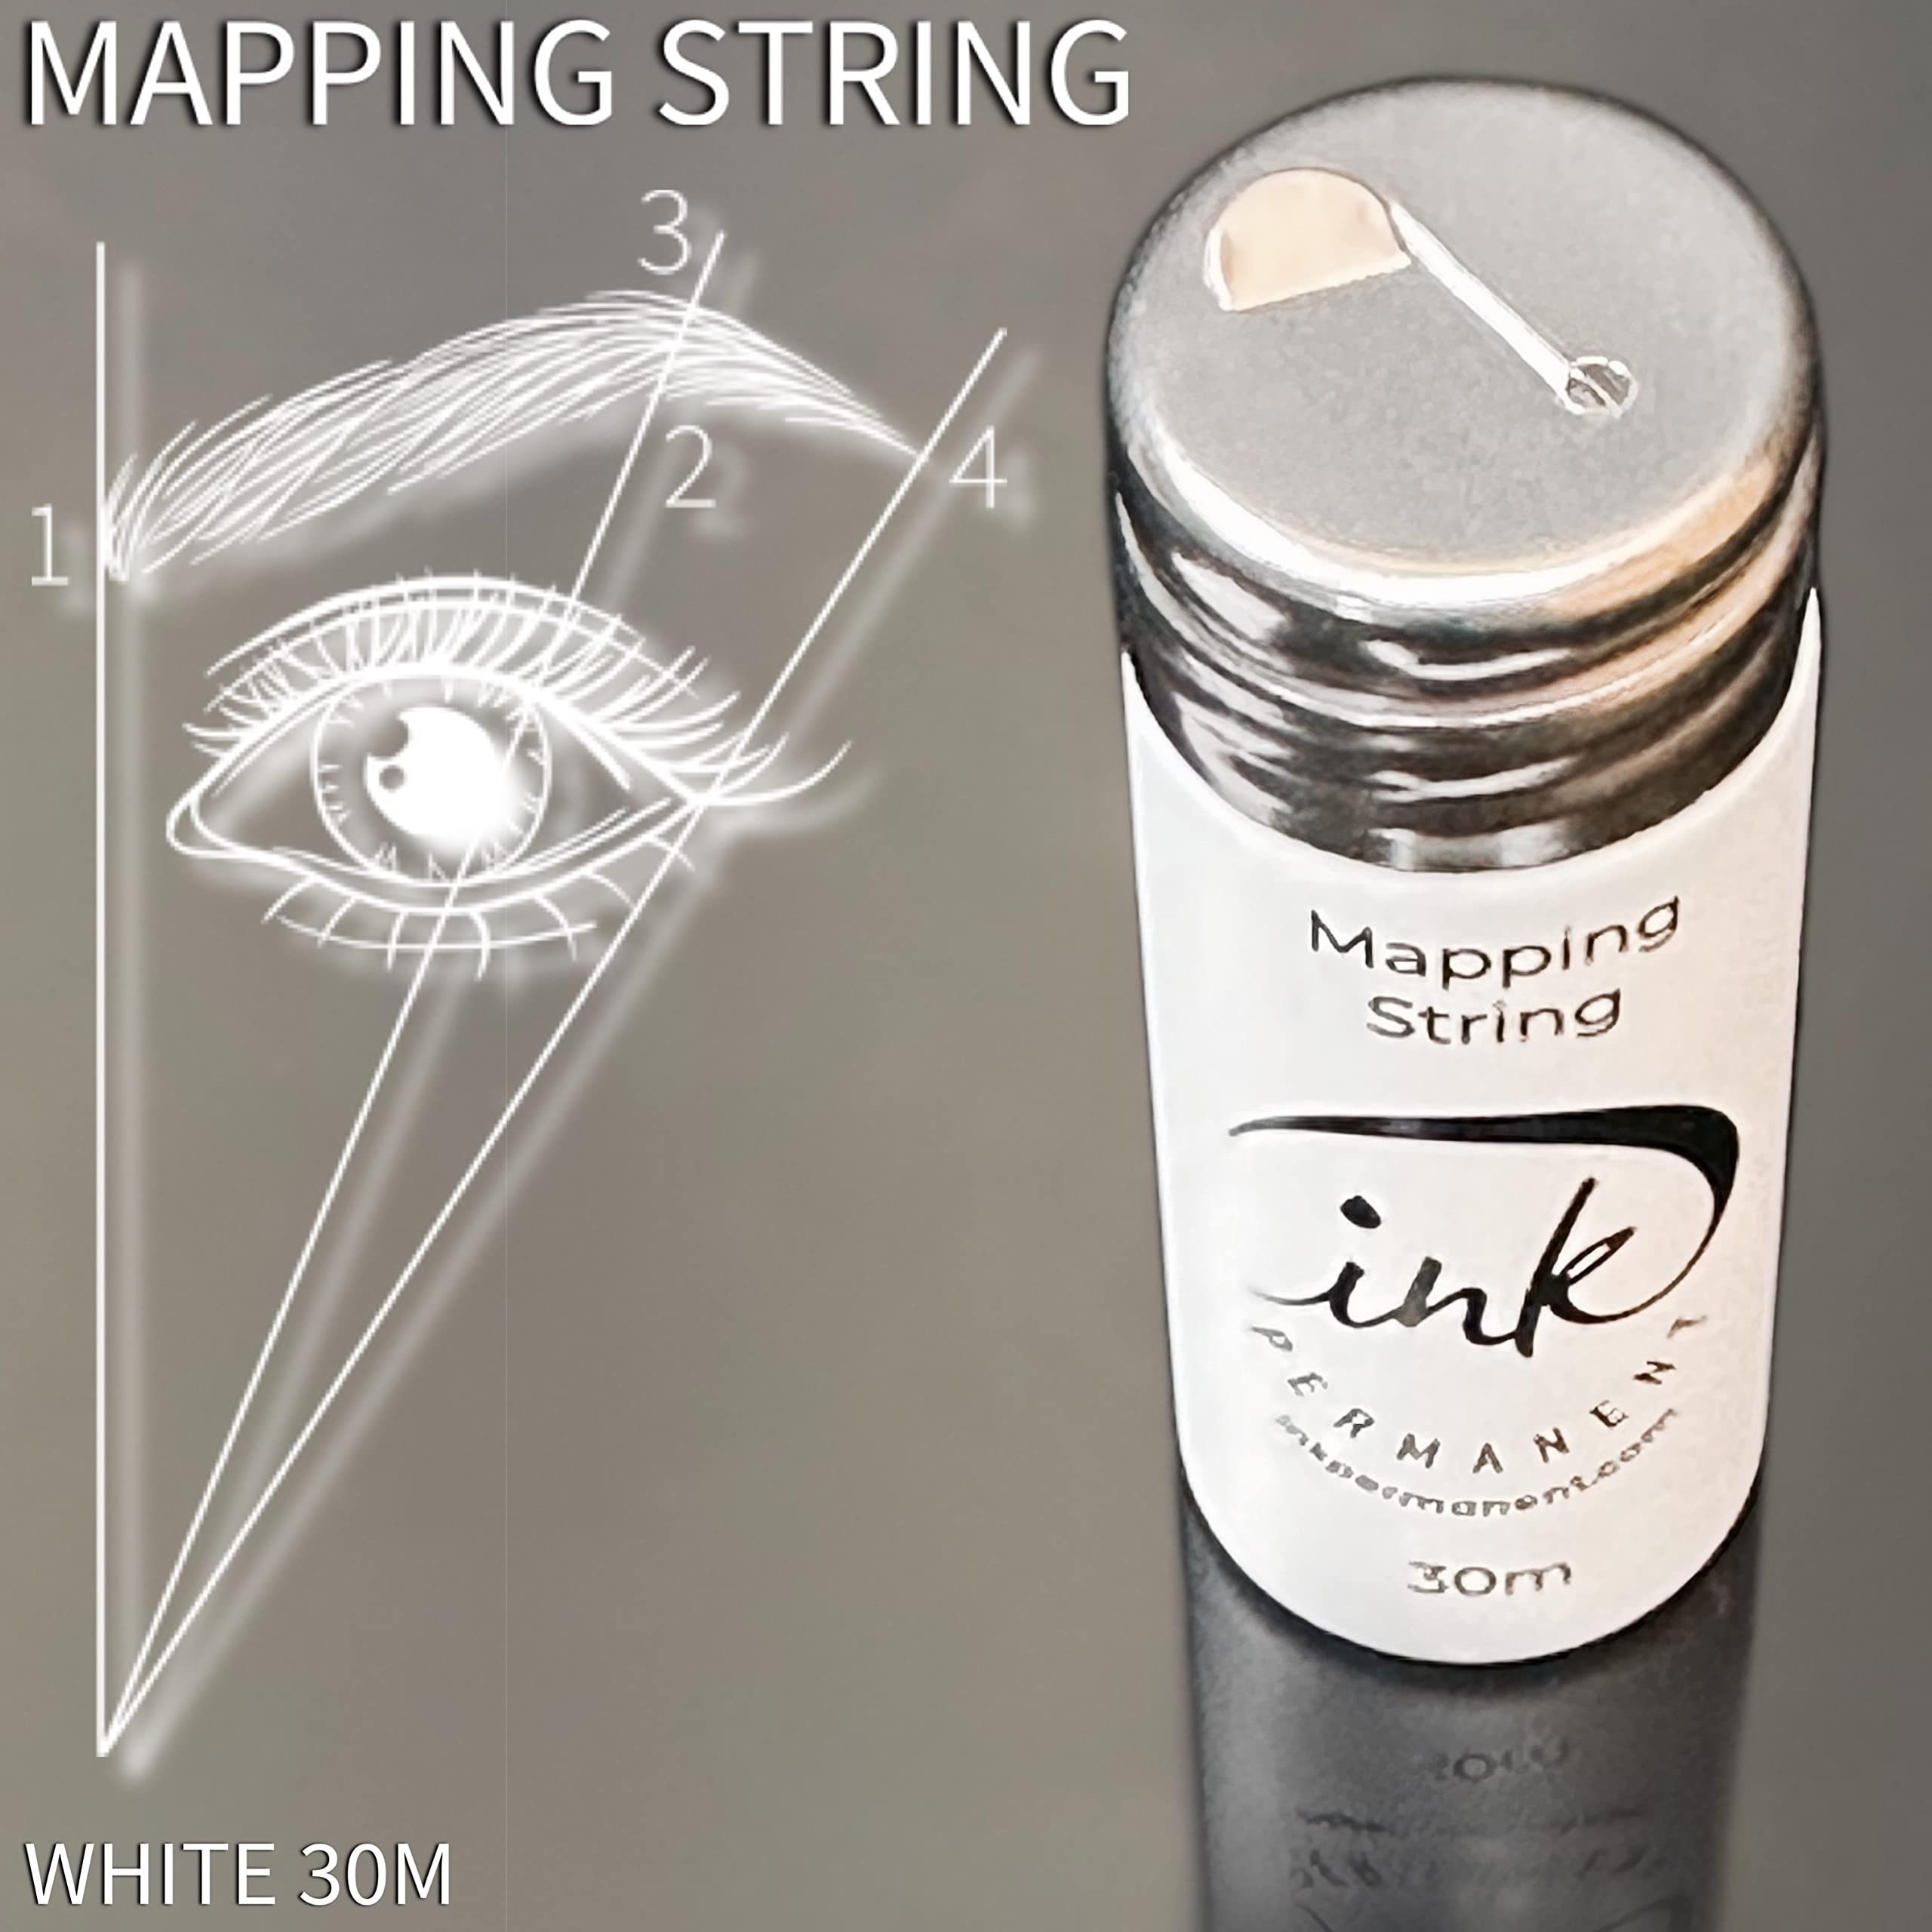 Ink Permanent White Brow Mapping String [100 Ft Bottles - 30 m] Pre-Inked Mapping String for Permanent Makeup and Microblading Supplies | Brow Mapping Kit | Mapping String for Brow Mapping (White)